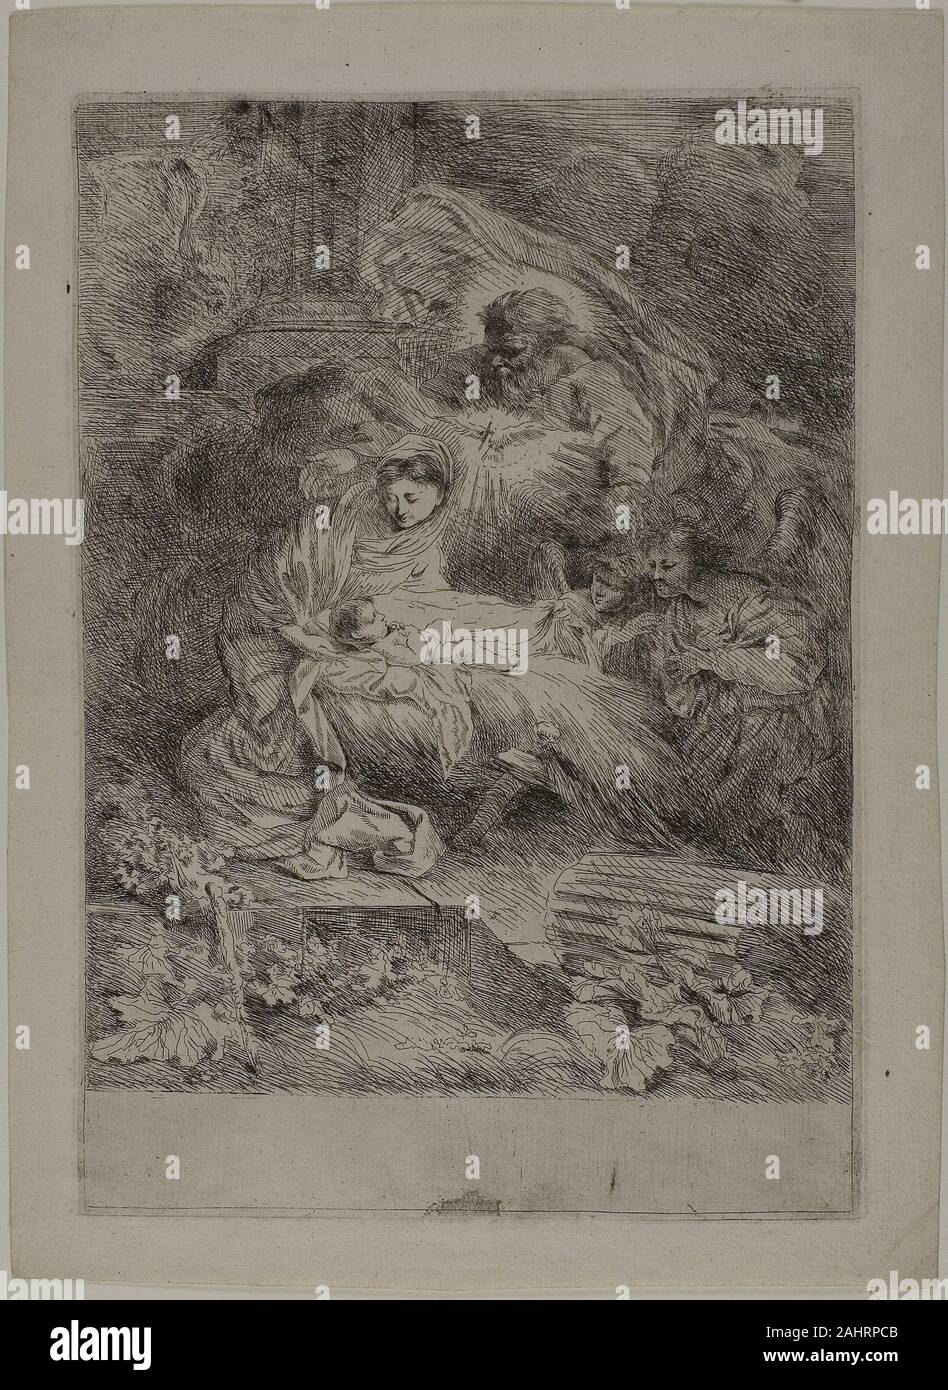 Giovanni Benedetto Castiglione. The Nativity with God the Father and Angels. 1645–1649. Italy. Etching on ivory laid paper A prolific painter, etcher, and draftsman, Giovanni Benedetto Castiglione produced several innovative renditions of the Nativity. The epic horizontal sweep of this etching emphasizes the cosmic power of Christ’s heavenly father (it entirely omits Joseph, Christ’s earthly stepfather). Stock Photo